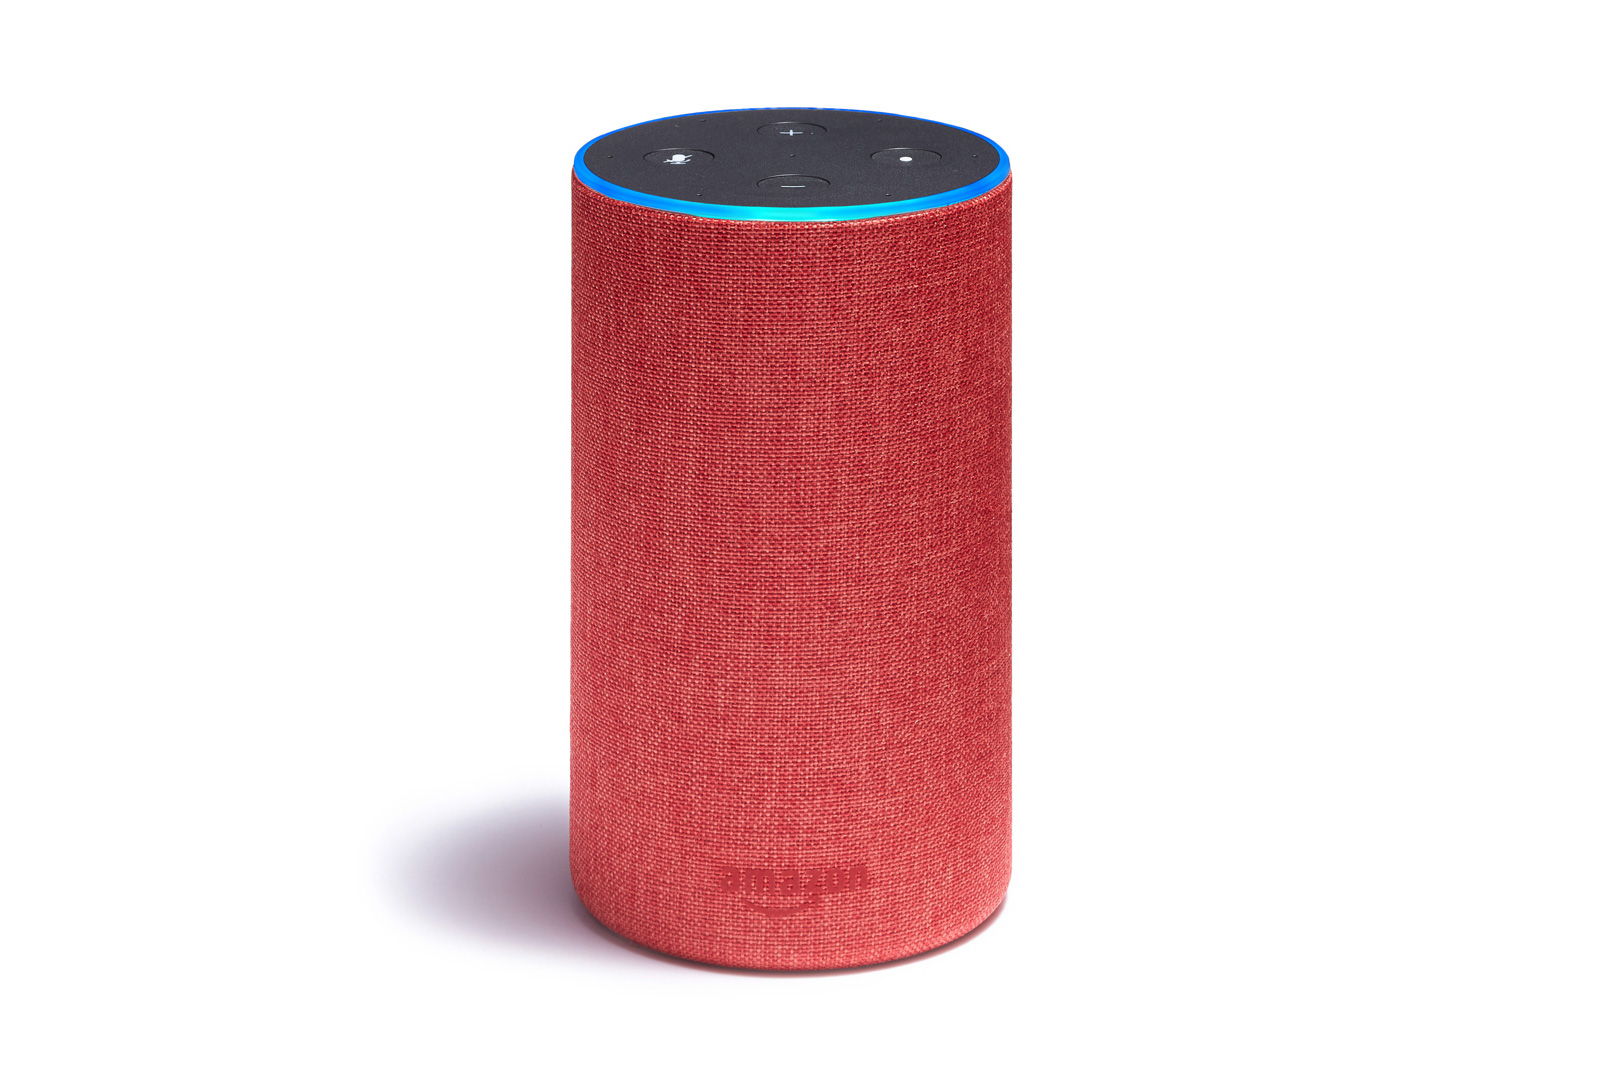 photo of Amazon Echo is the latest device to benefit (RED) image